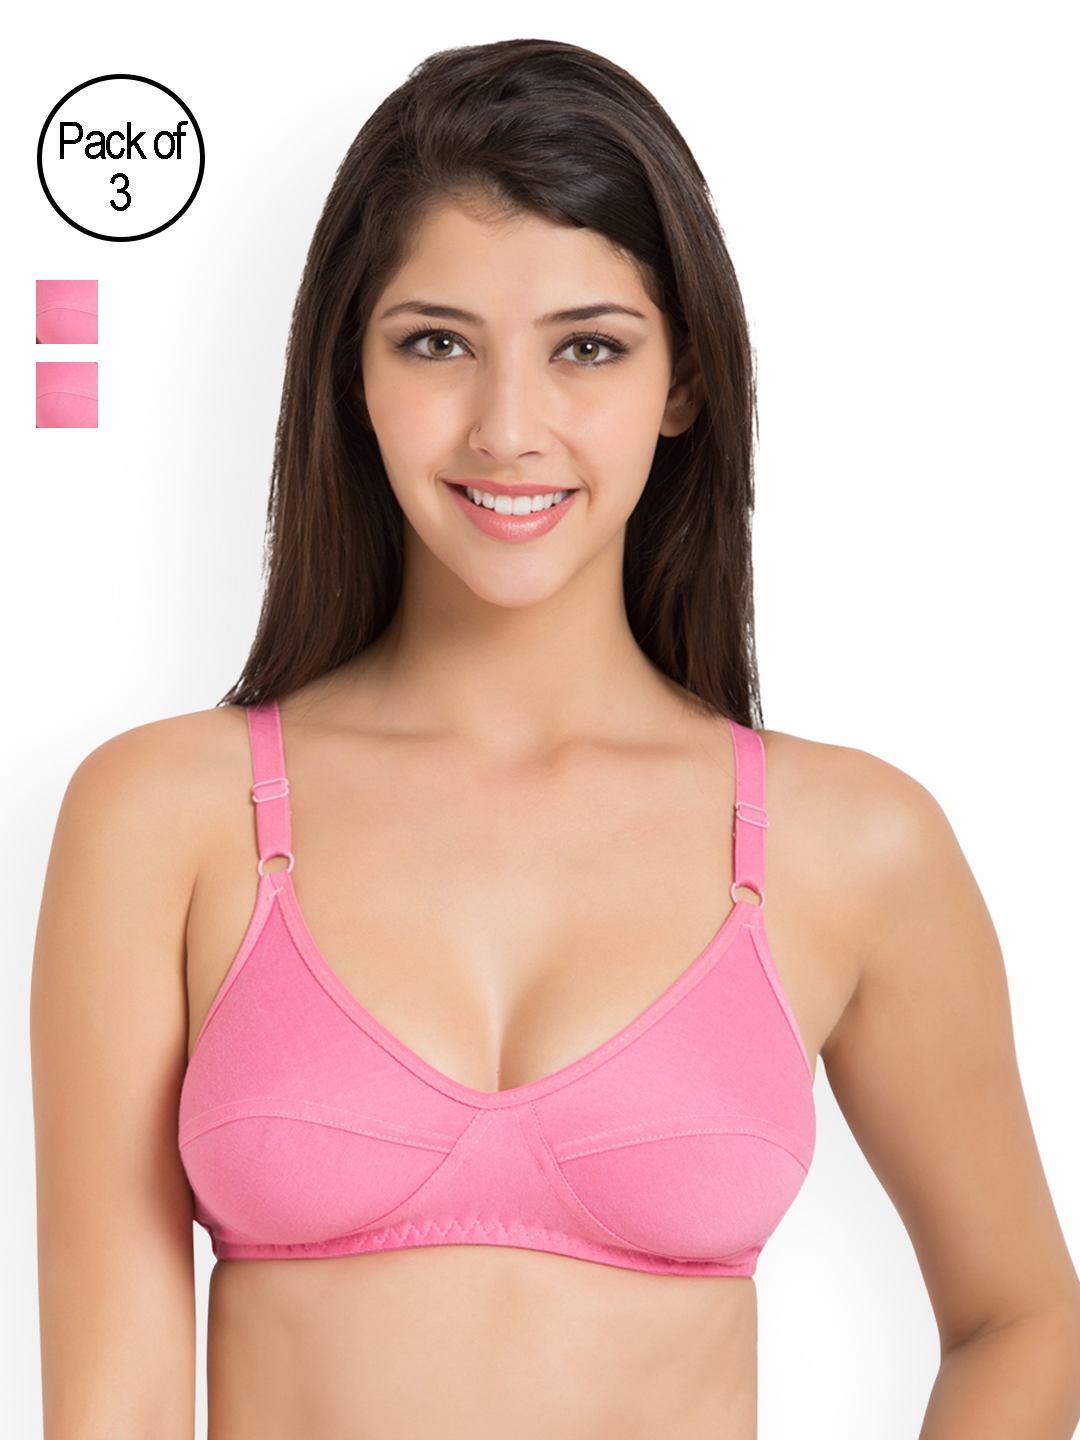 Buy SOUMINIE Women's Soft Fit Cotton White Non Padded Bra-40C at